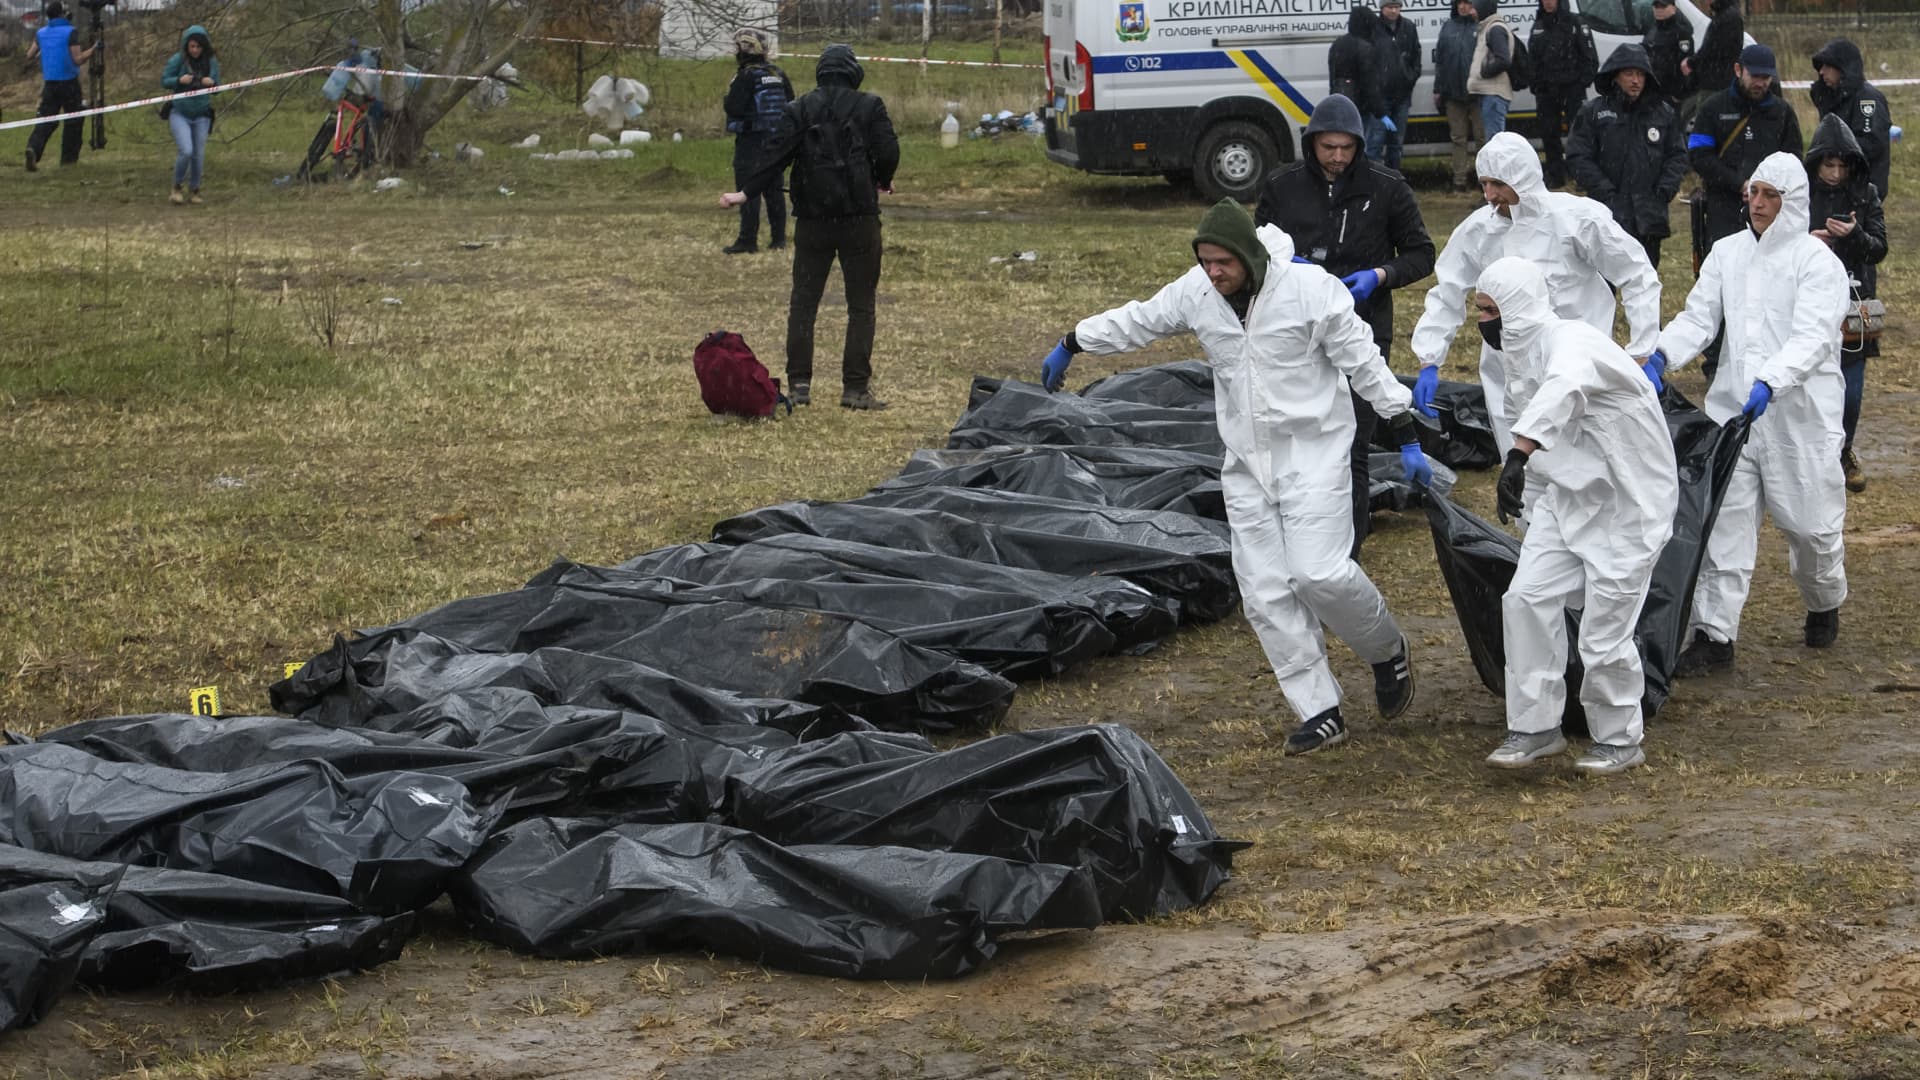 (EDITOR'S NOTE: Image depict deaths) Criminalists get from the mass grave the bodies of civilians killed by the Russian army in Bucha, outside of Kyiv, Ukraine April 8, 2022.